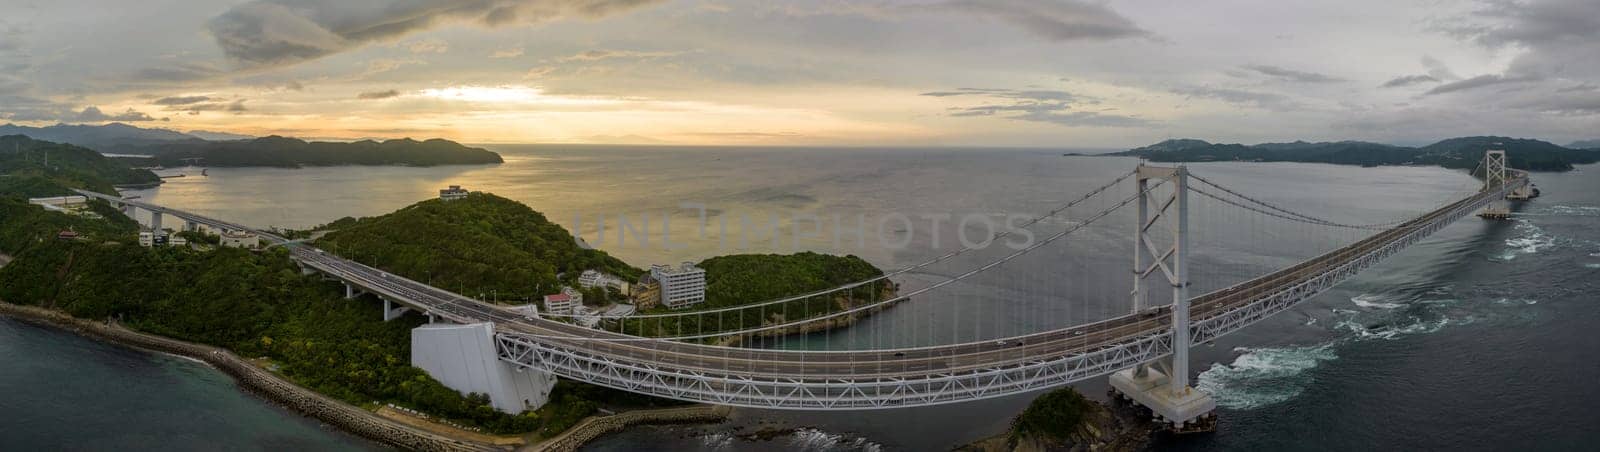 Panoramic aerial view of Onaruto Bridge and whirlpools at sunset by Osaze